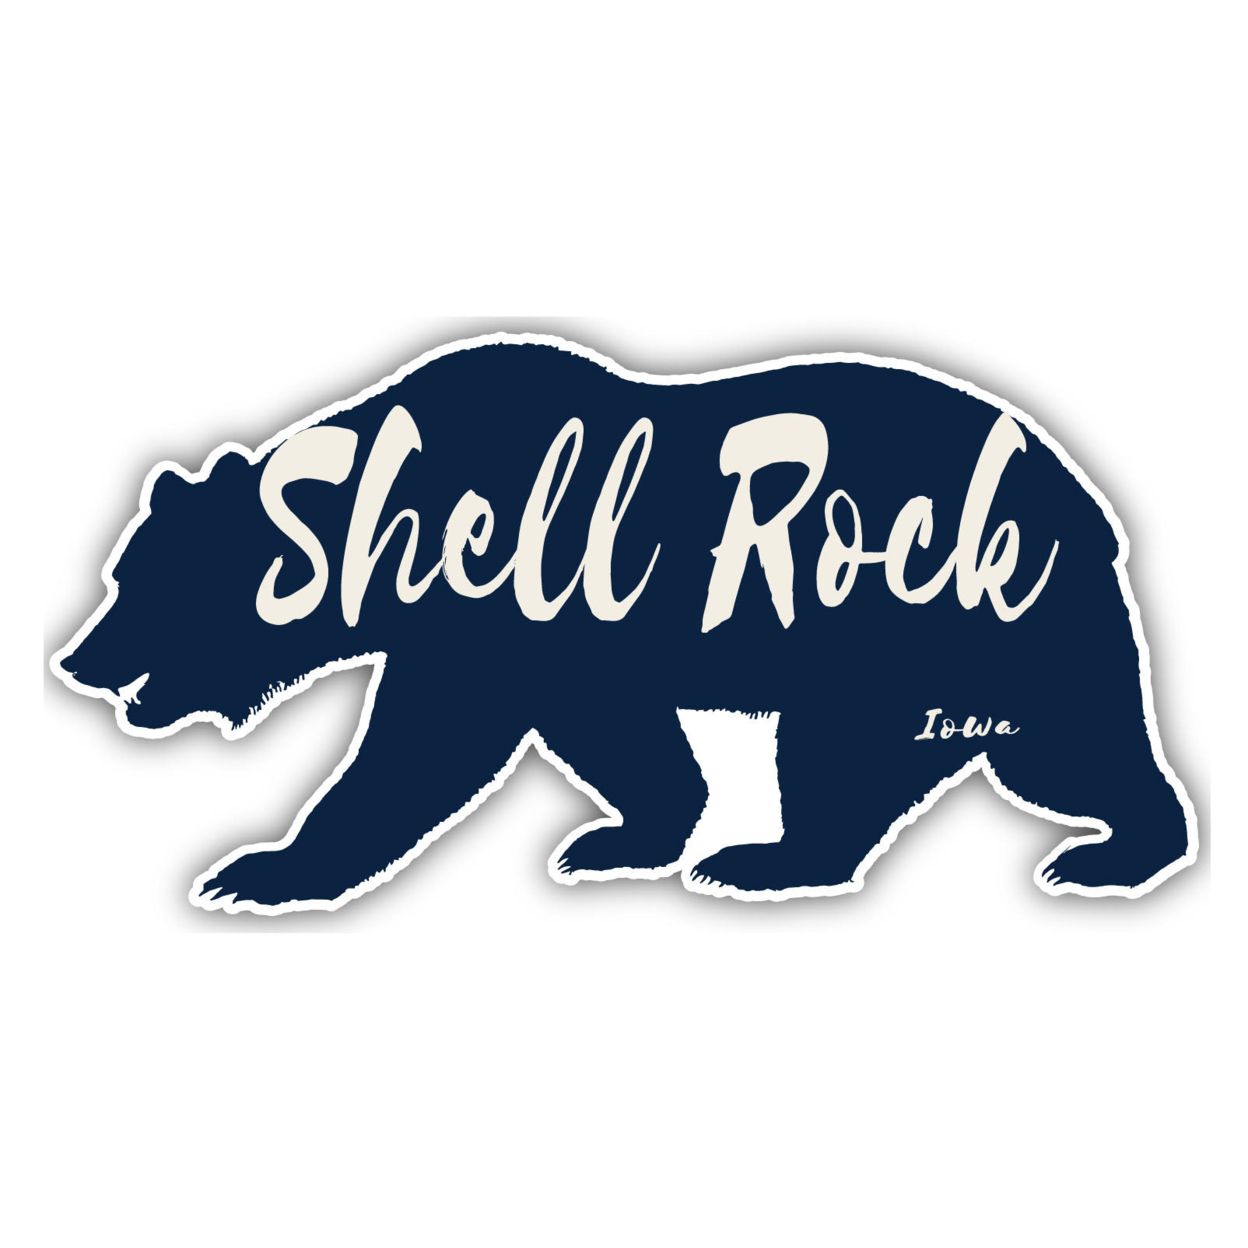 Shell Rock Iowa Souvenir Decorative Stickers (Choose Theme And Size) - Single Unit, 2-Inch, Great Outdoors